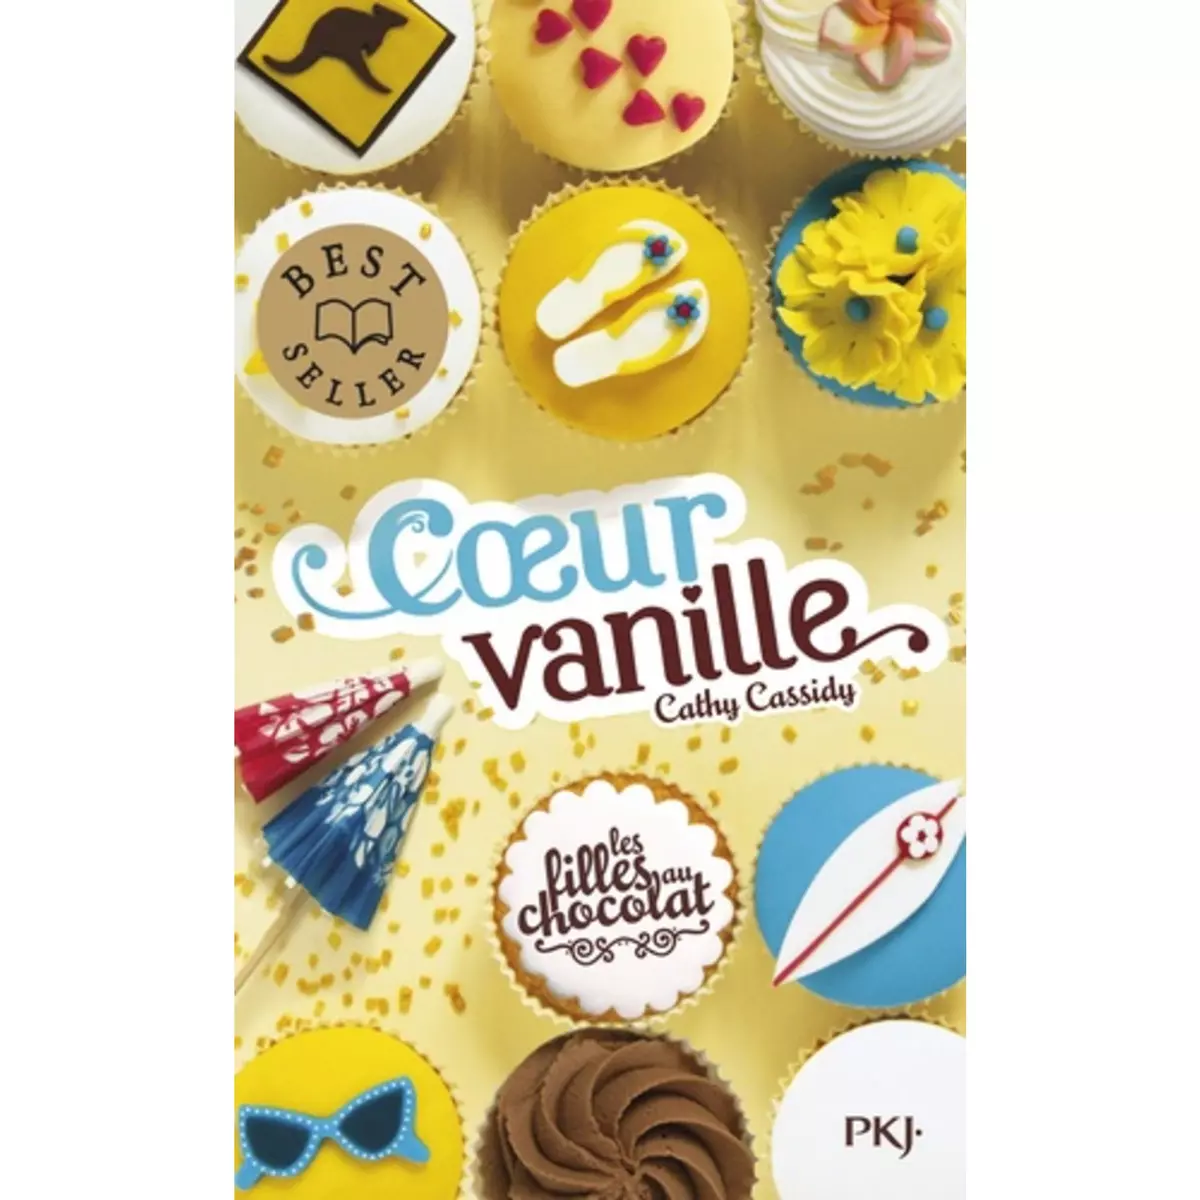  LES FILLES AU CHOCOLAT TOME 5 : COEUR VANILLE, Cassidy Cathy